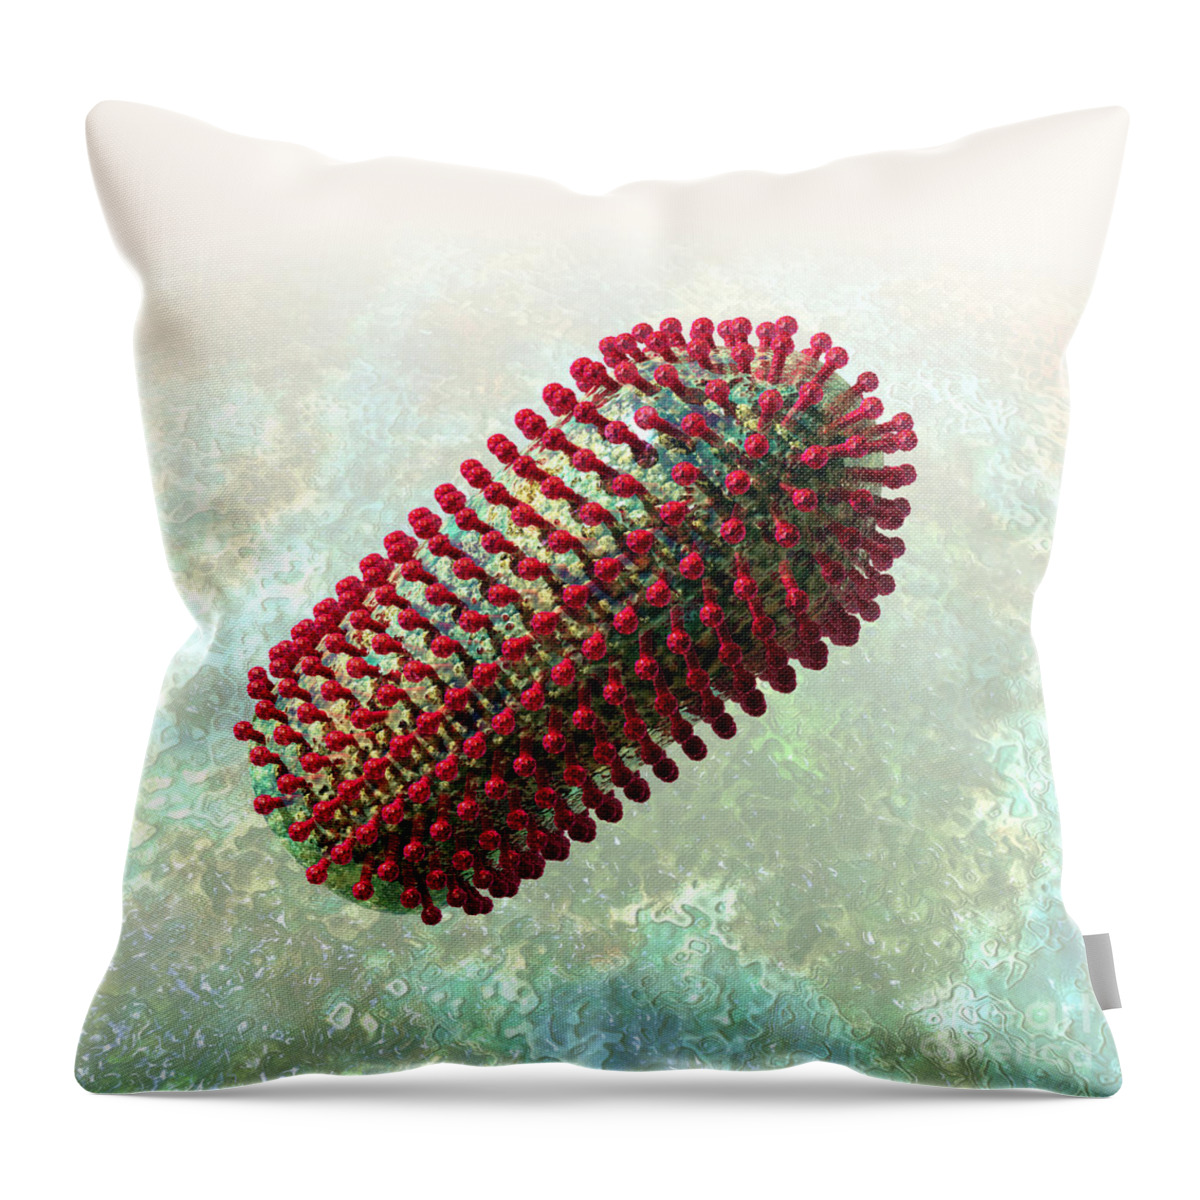 Biological Throw Pillow featuring the digital art Rabies Virus 2 by Russell Kightley